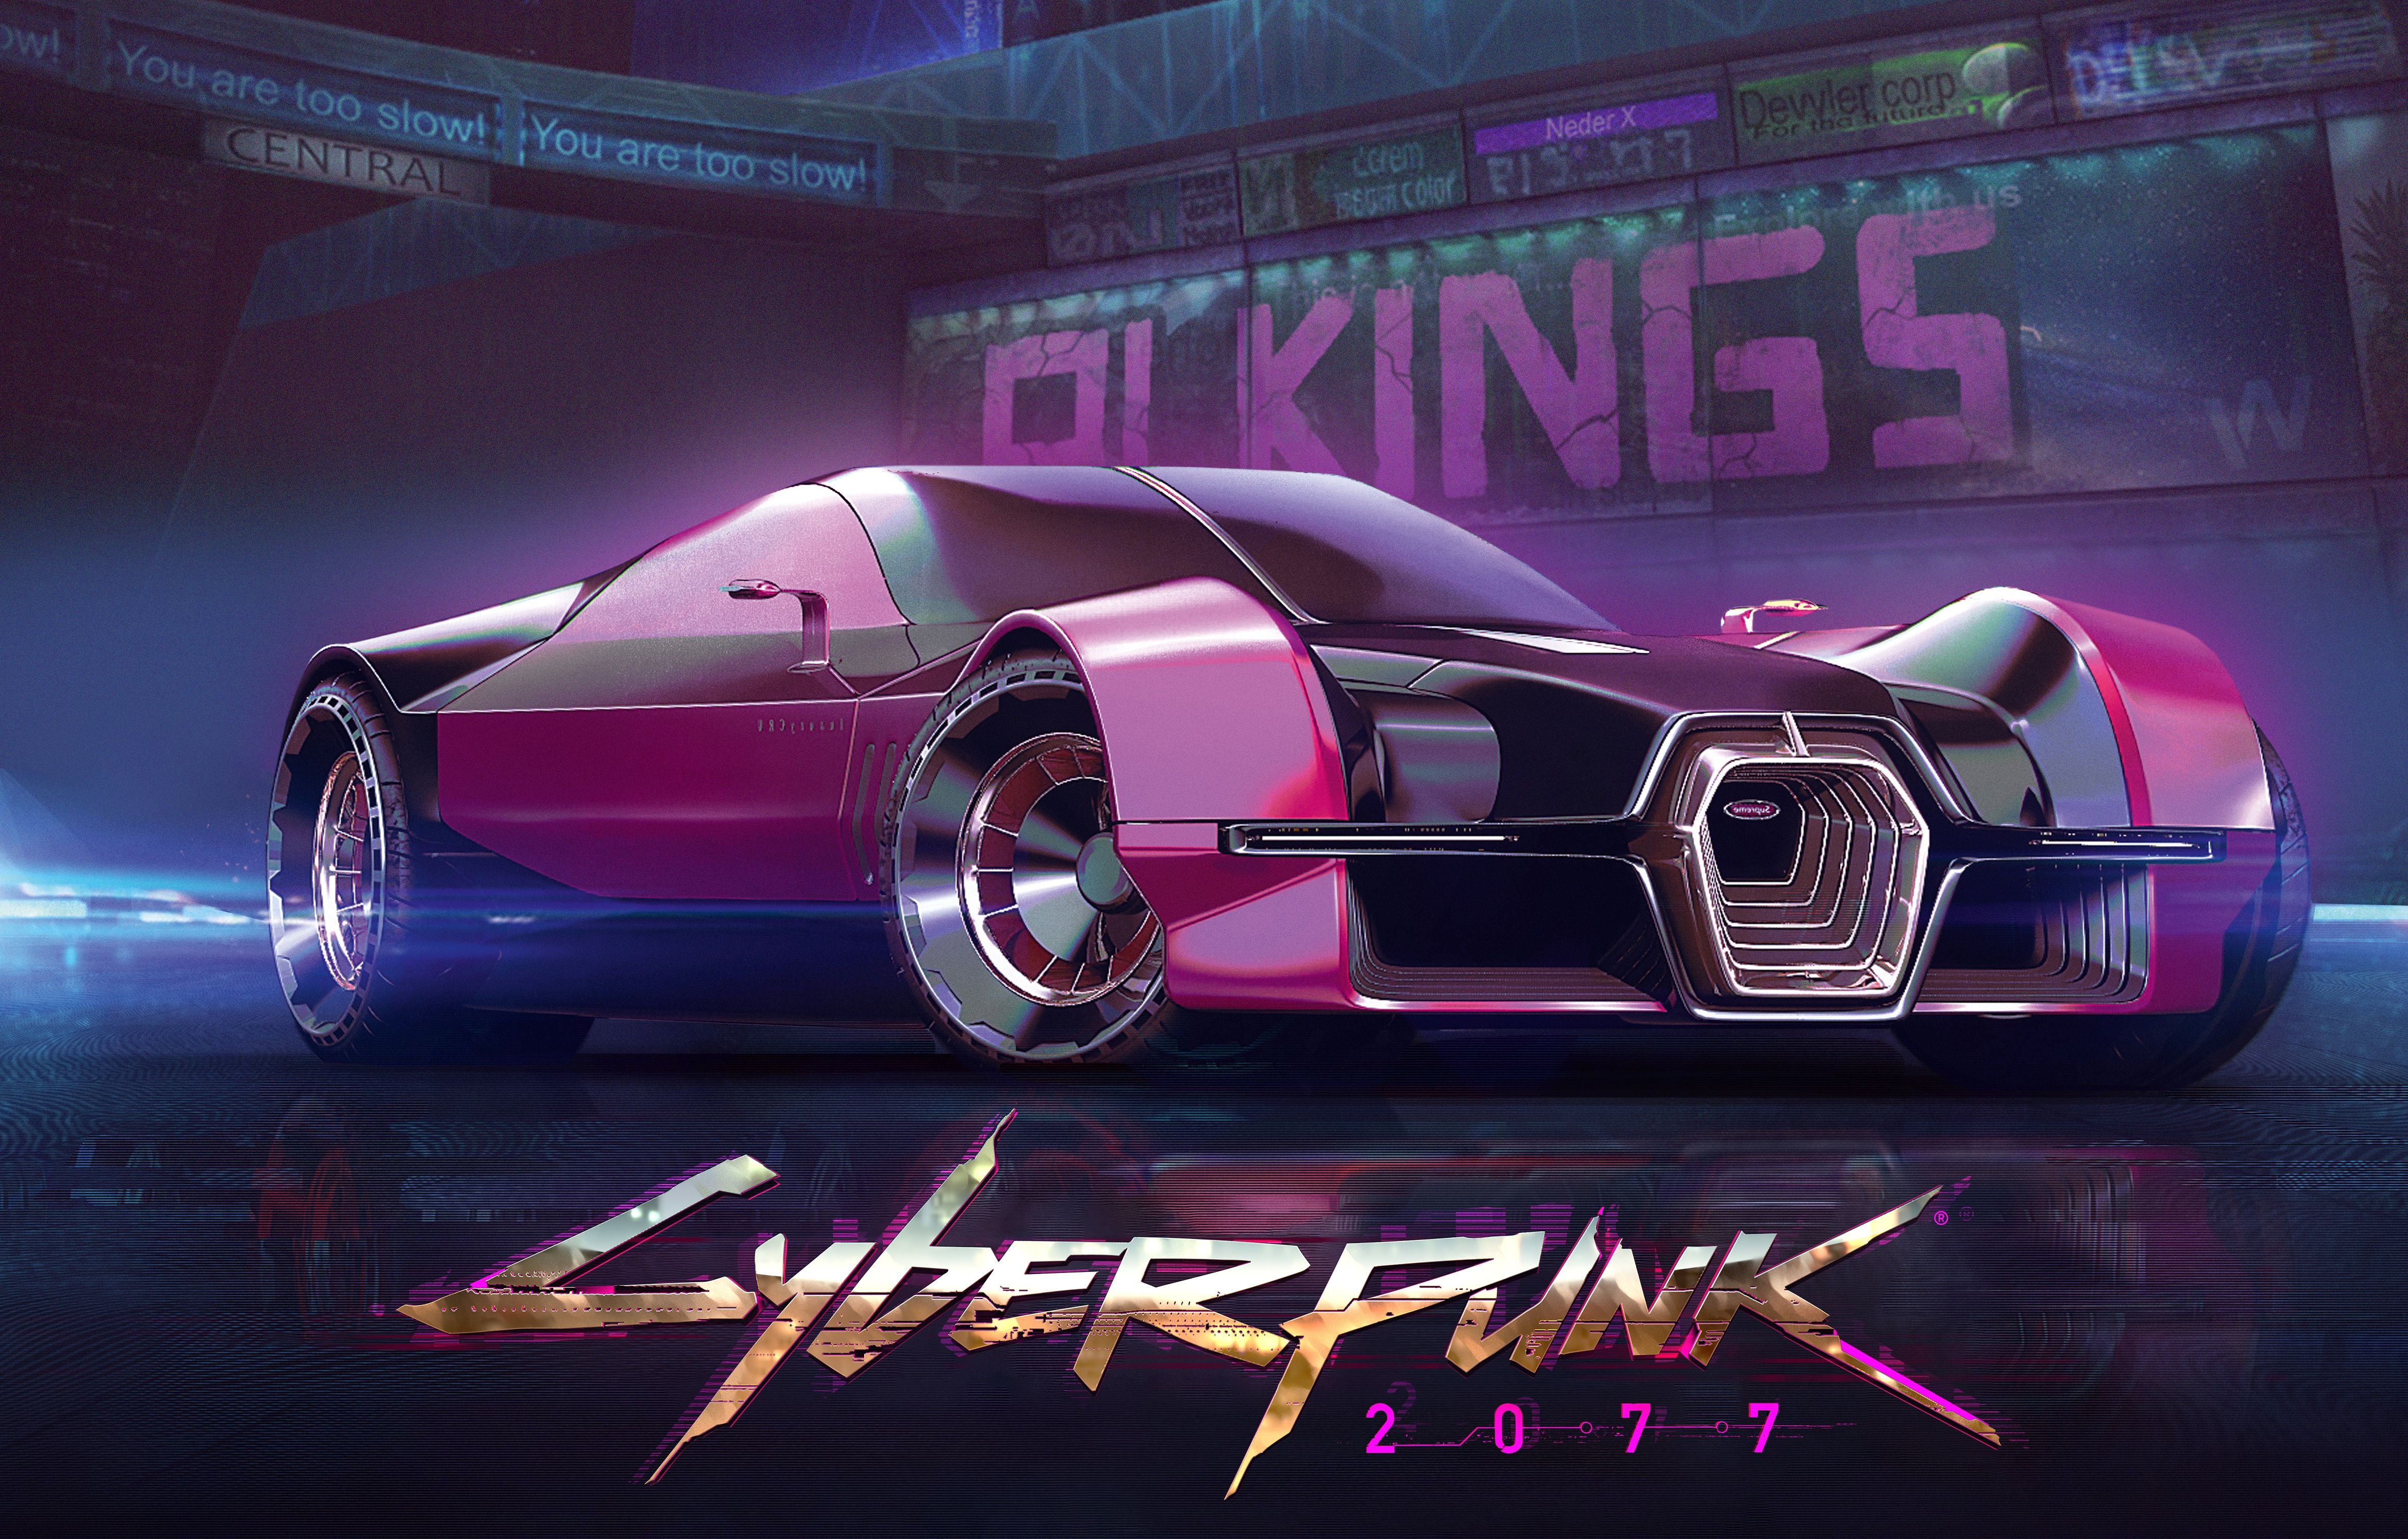 Cyberpunk 2077 Car 4k Wallpaper,HD Games Wallpapers,4k Wallpapers,Images, Backgrounds,Photos and Pictures